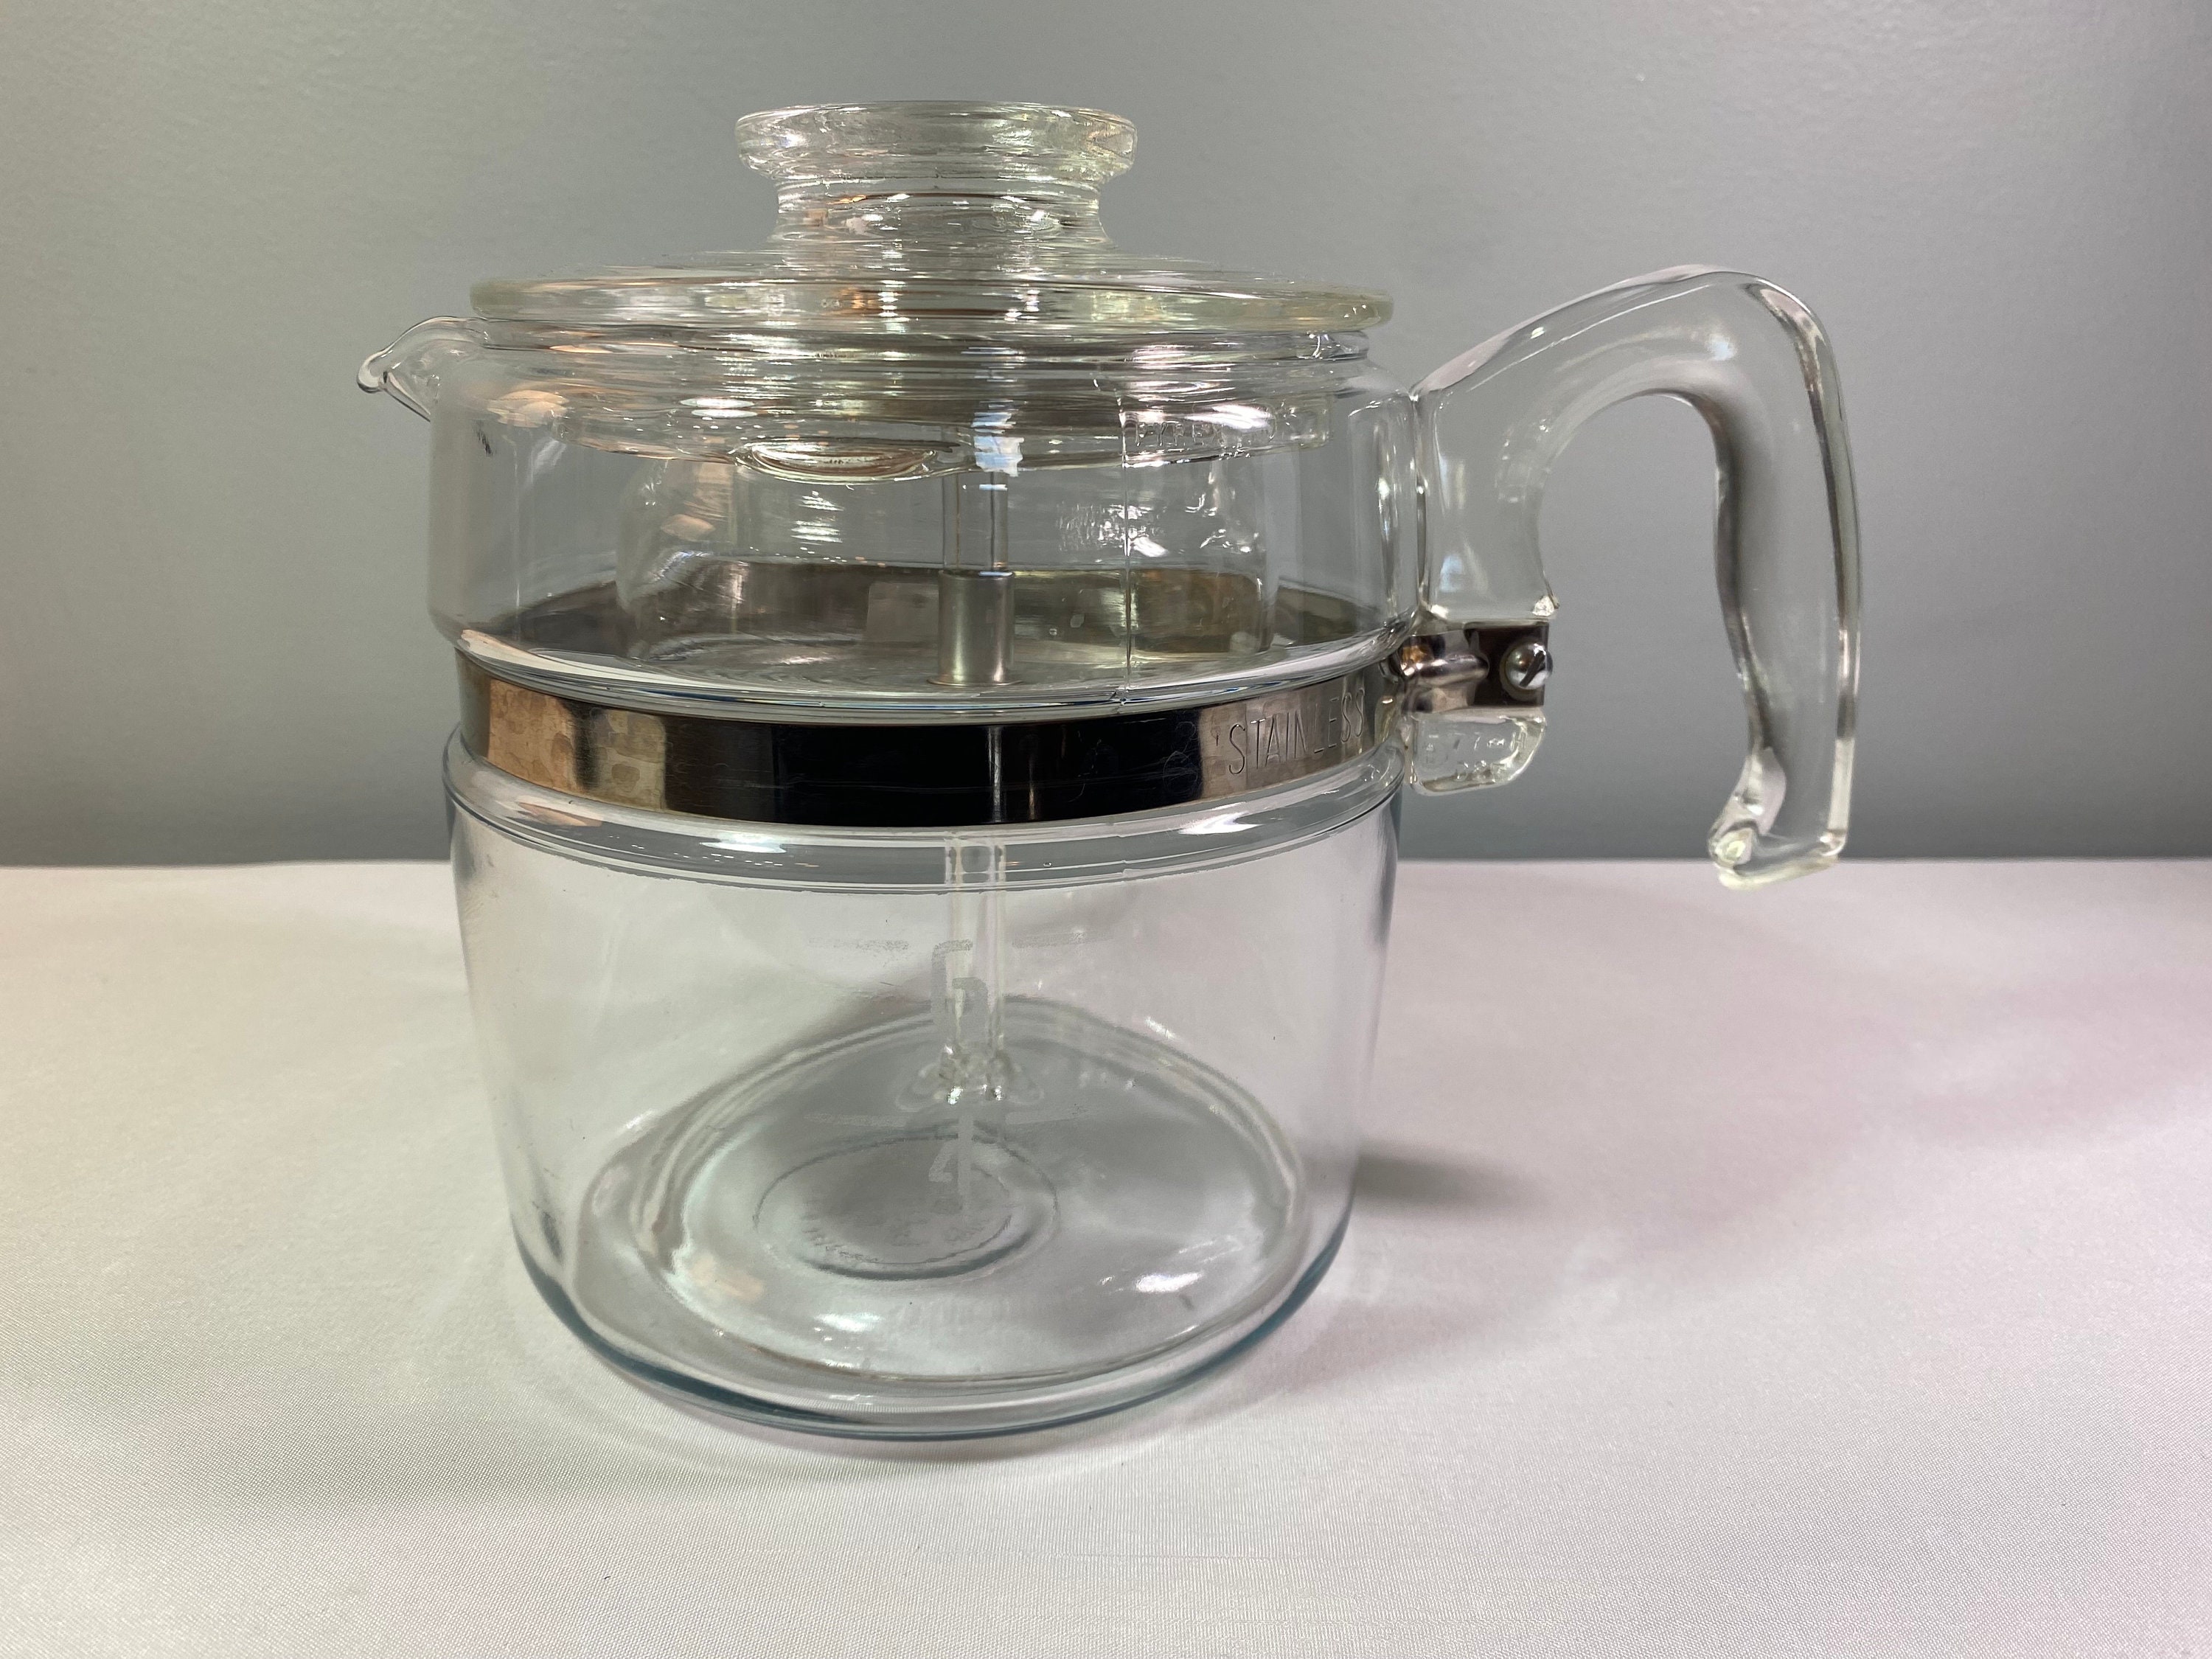  Vintage Pyrex 7756 6 Cup Stovetop Percolator Flameware Slight  Blue Tint: Kitchen Products: Home & Kitchen